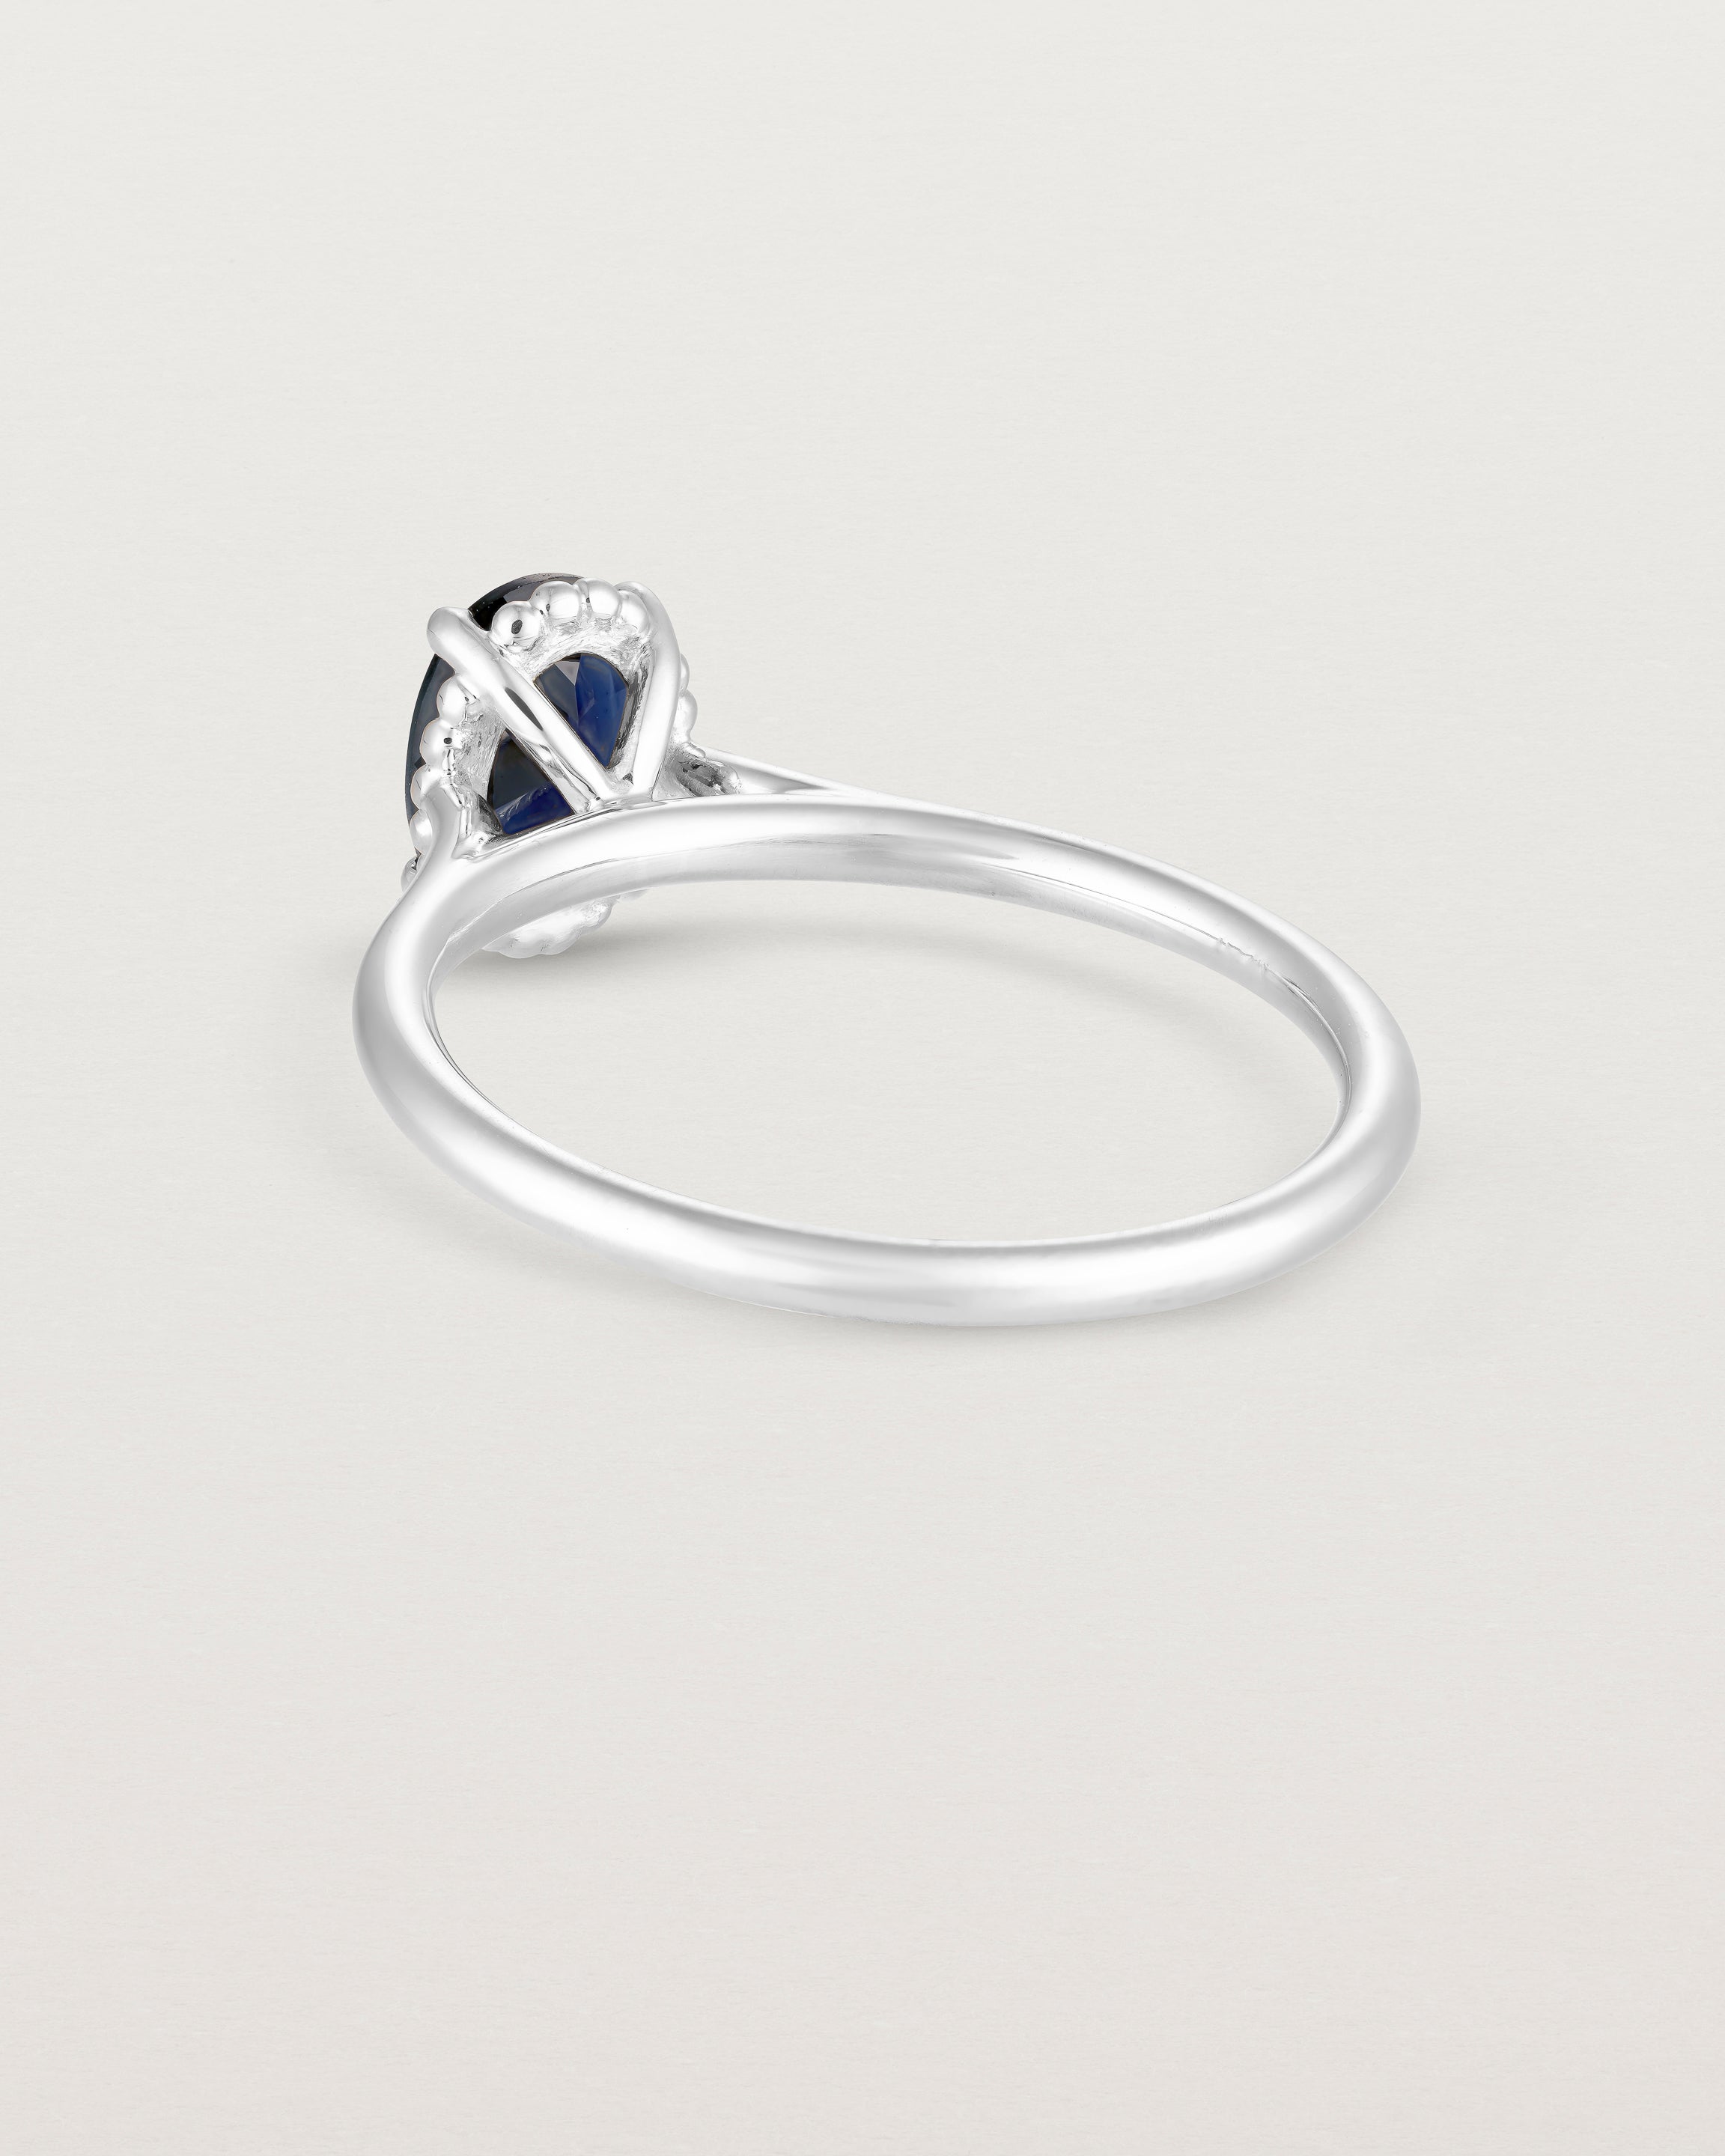 A back view of the Thea Oval Solitaire with a deep blue Australian Sapphire set in White Gold